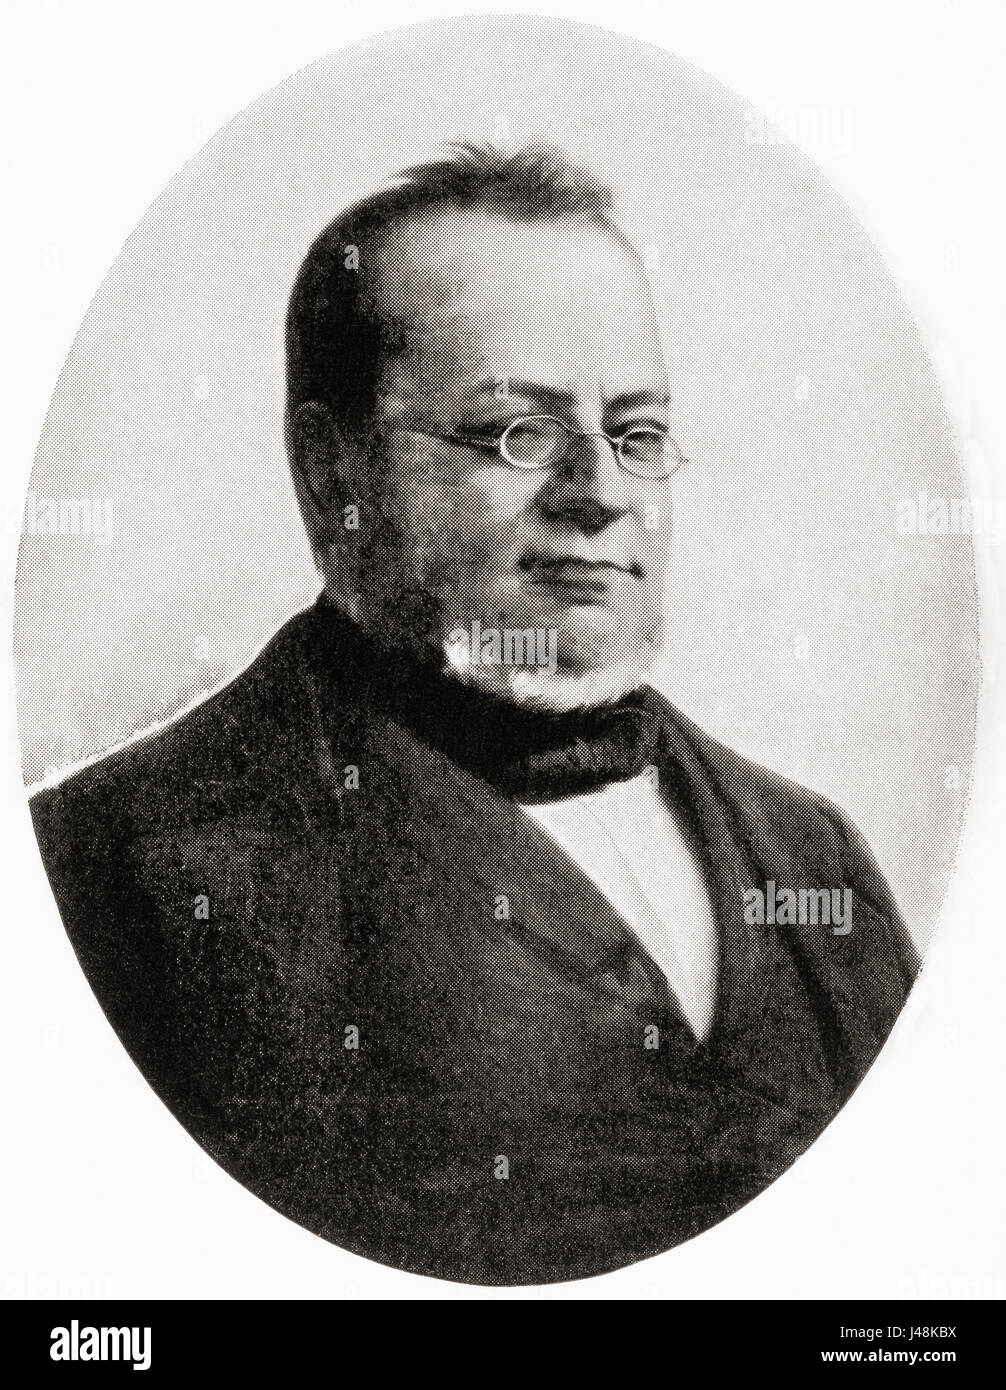 Camillo Paolo Filippo Giulio Benso, Count of Cavour, Isolabella and Leri, 1810 – 1861, aka Count Cavour.  Italian statesman and a leading figure in the movement toward Italian unification.  From Hutchinson's History of the Nations, published 1915. Stock Photo